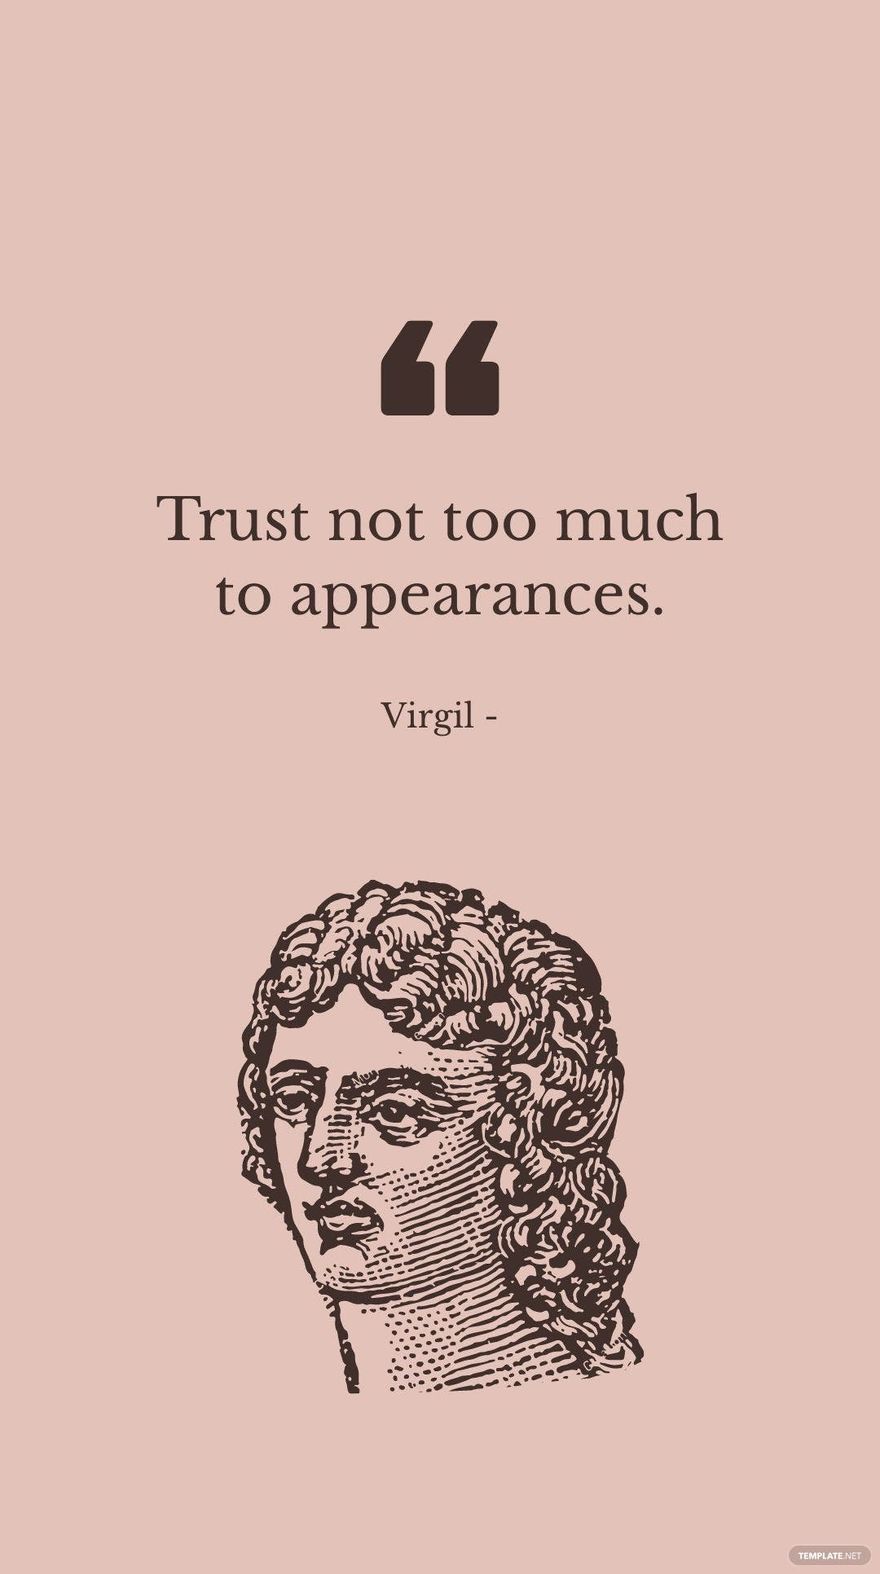 Virgil - Trust not too much to appearances.